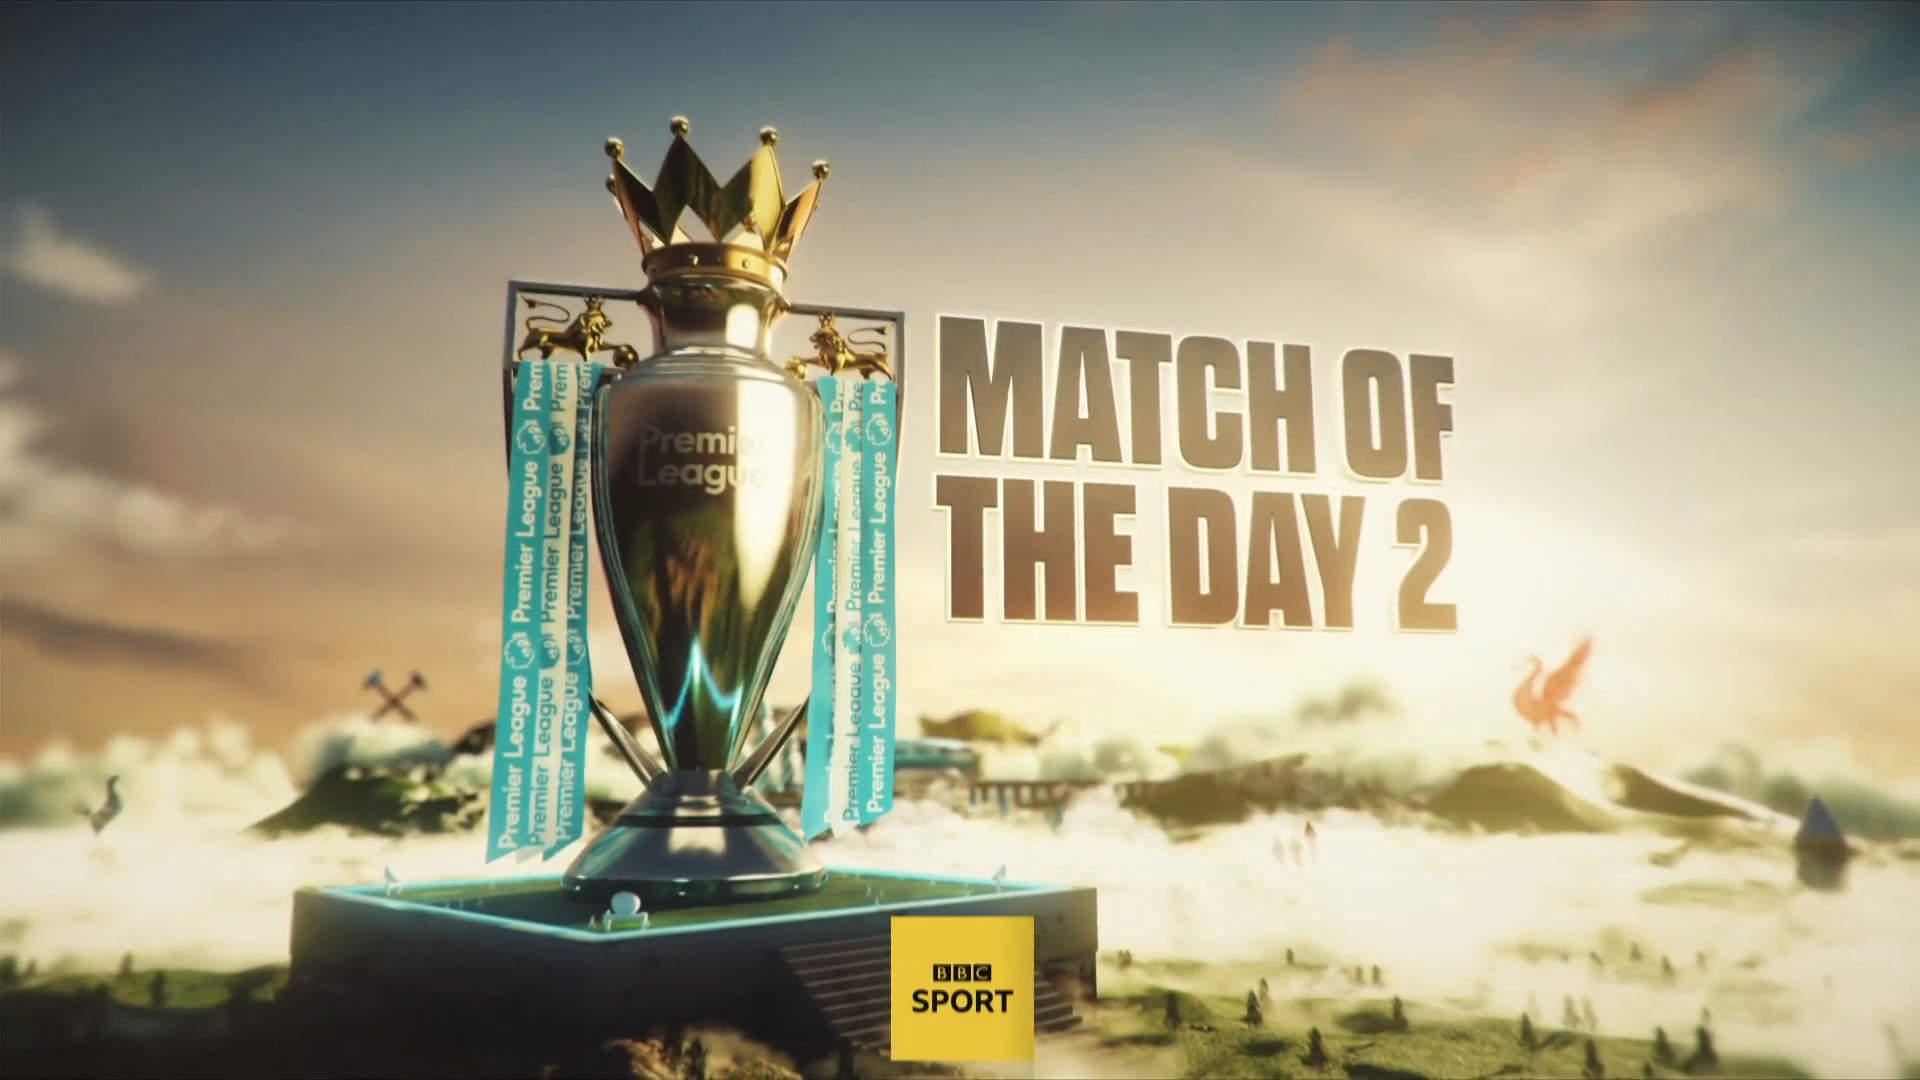 FÚTBOL Premier League Match of the Day 2 Matchday 29 08/03/2020